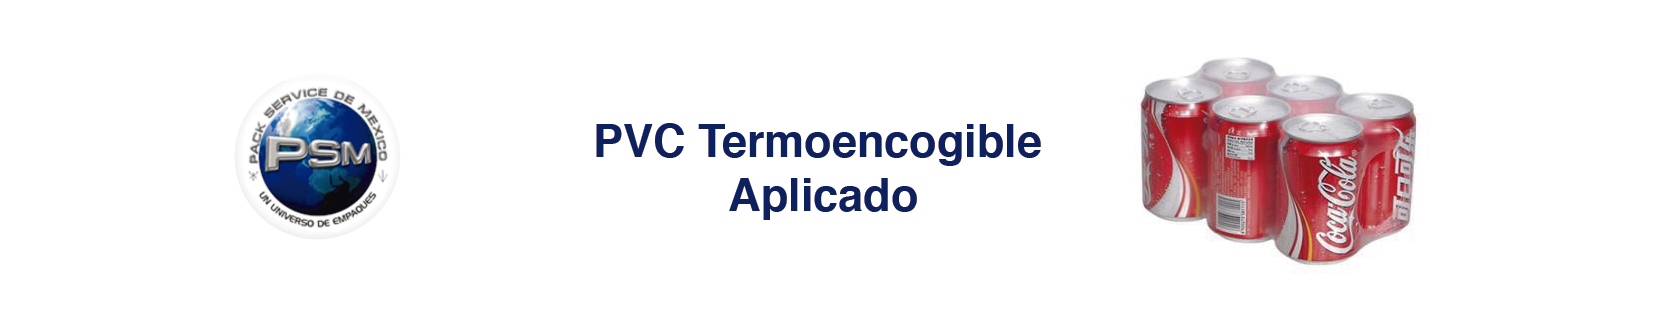 pvc termoencogible.png